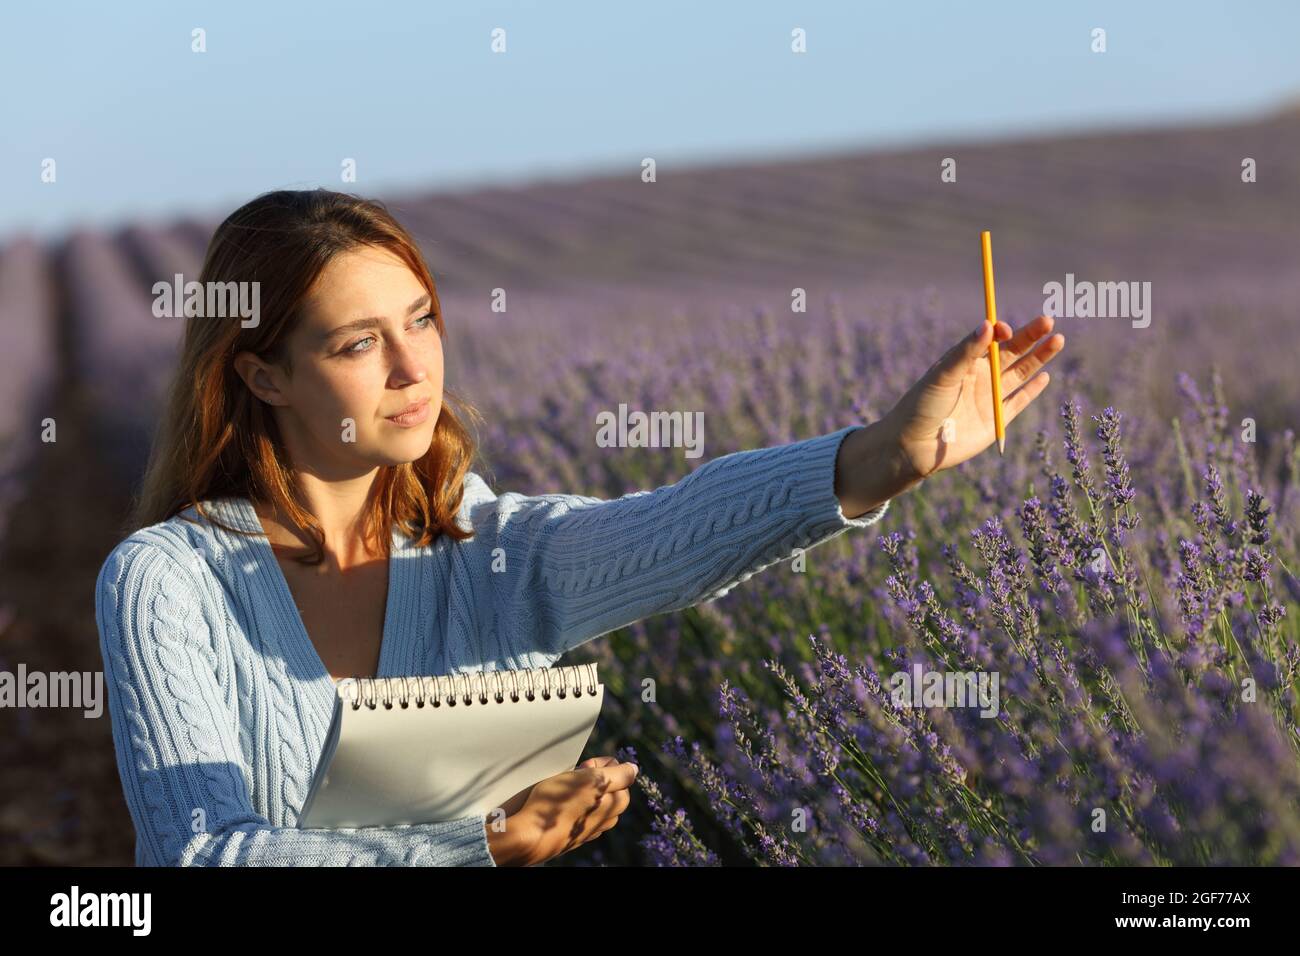 Woman drawing on notebook calculating perspective in a lavender field at sunset Stock Photo